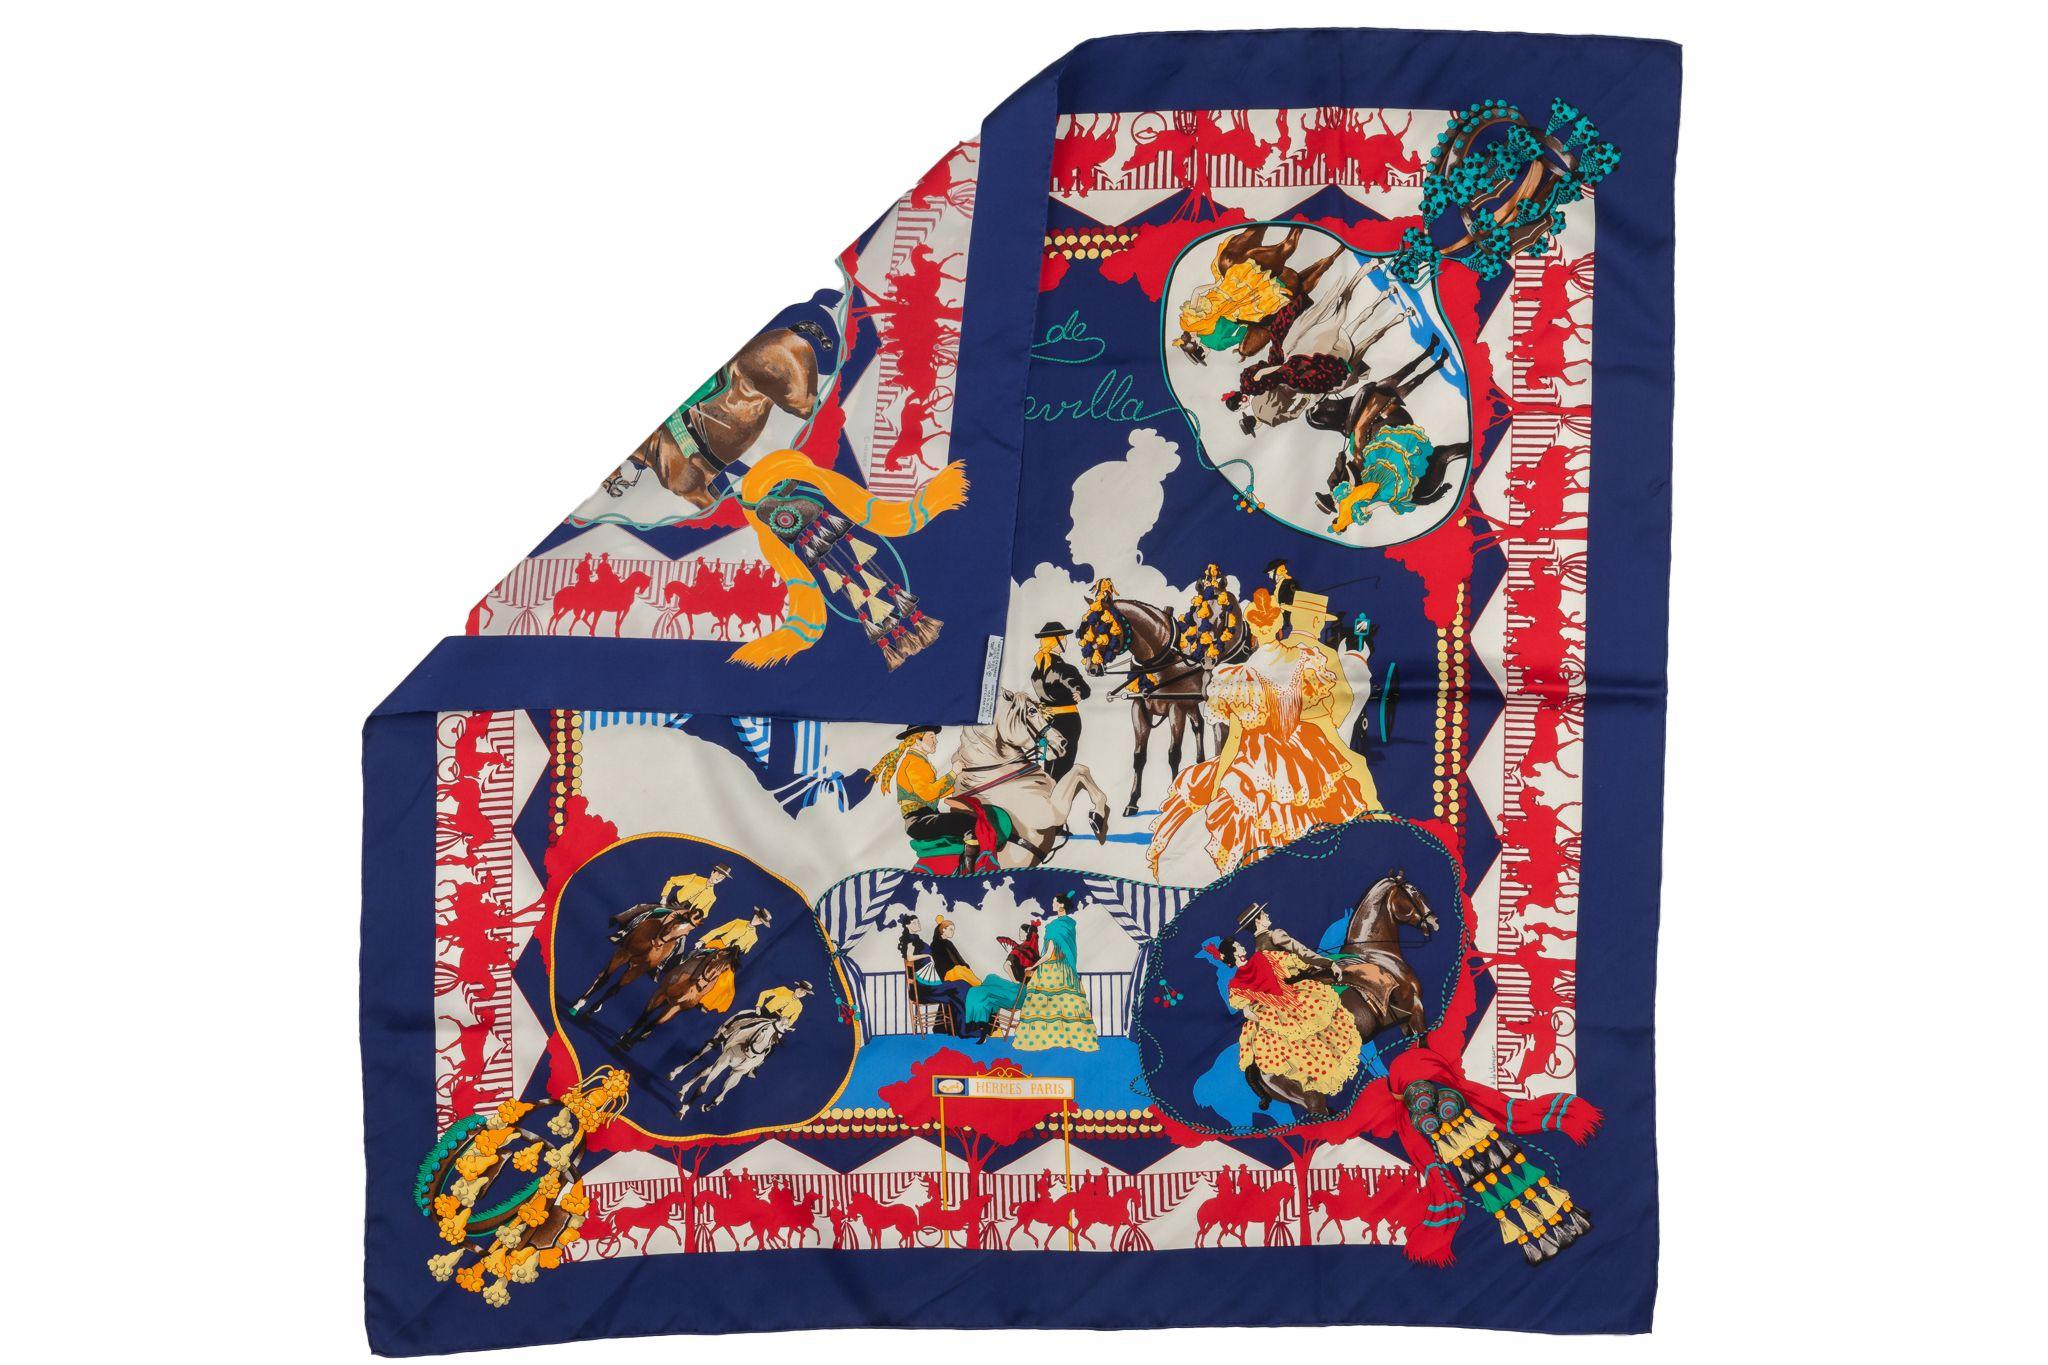 Hermes navy blue Feria de Sevilla Scarf made from 100% silk. Hand rolled edges. Comes without box.